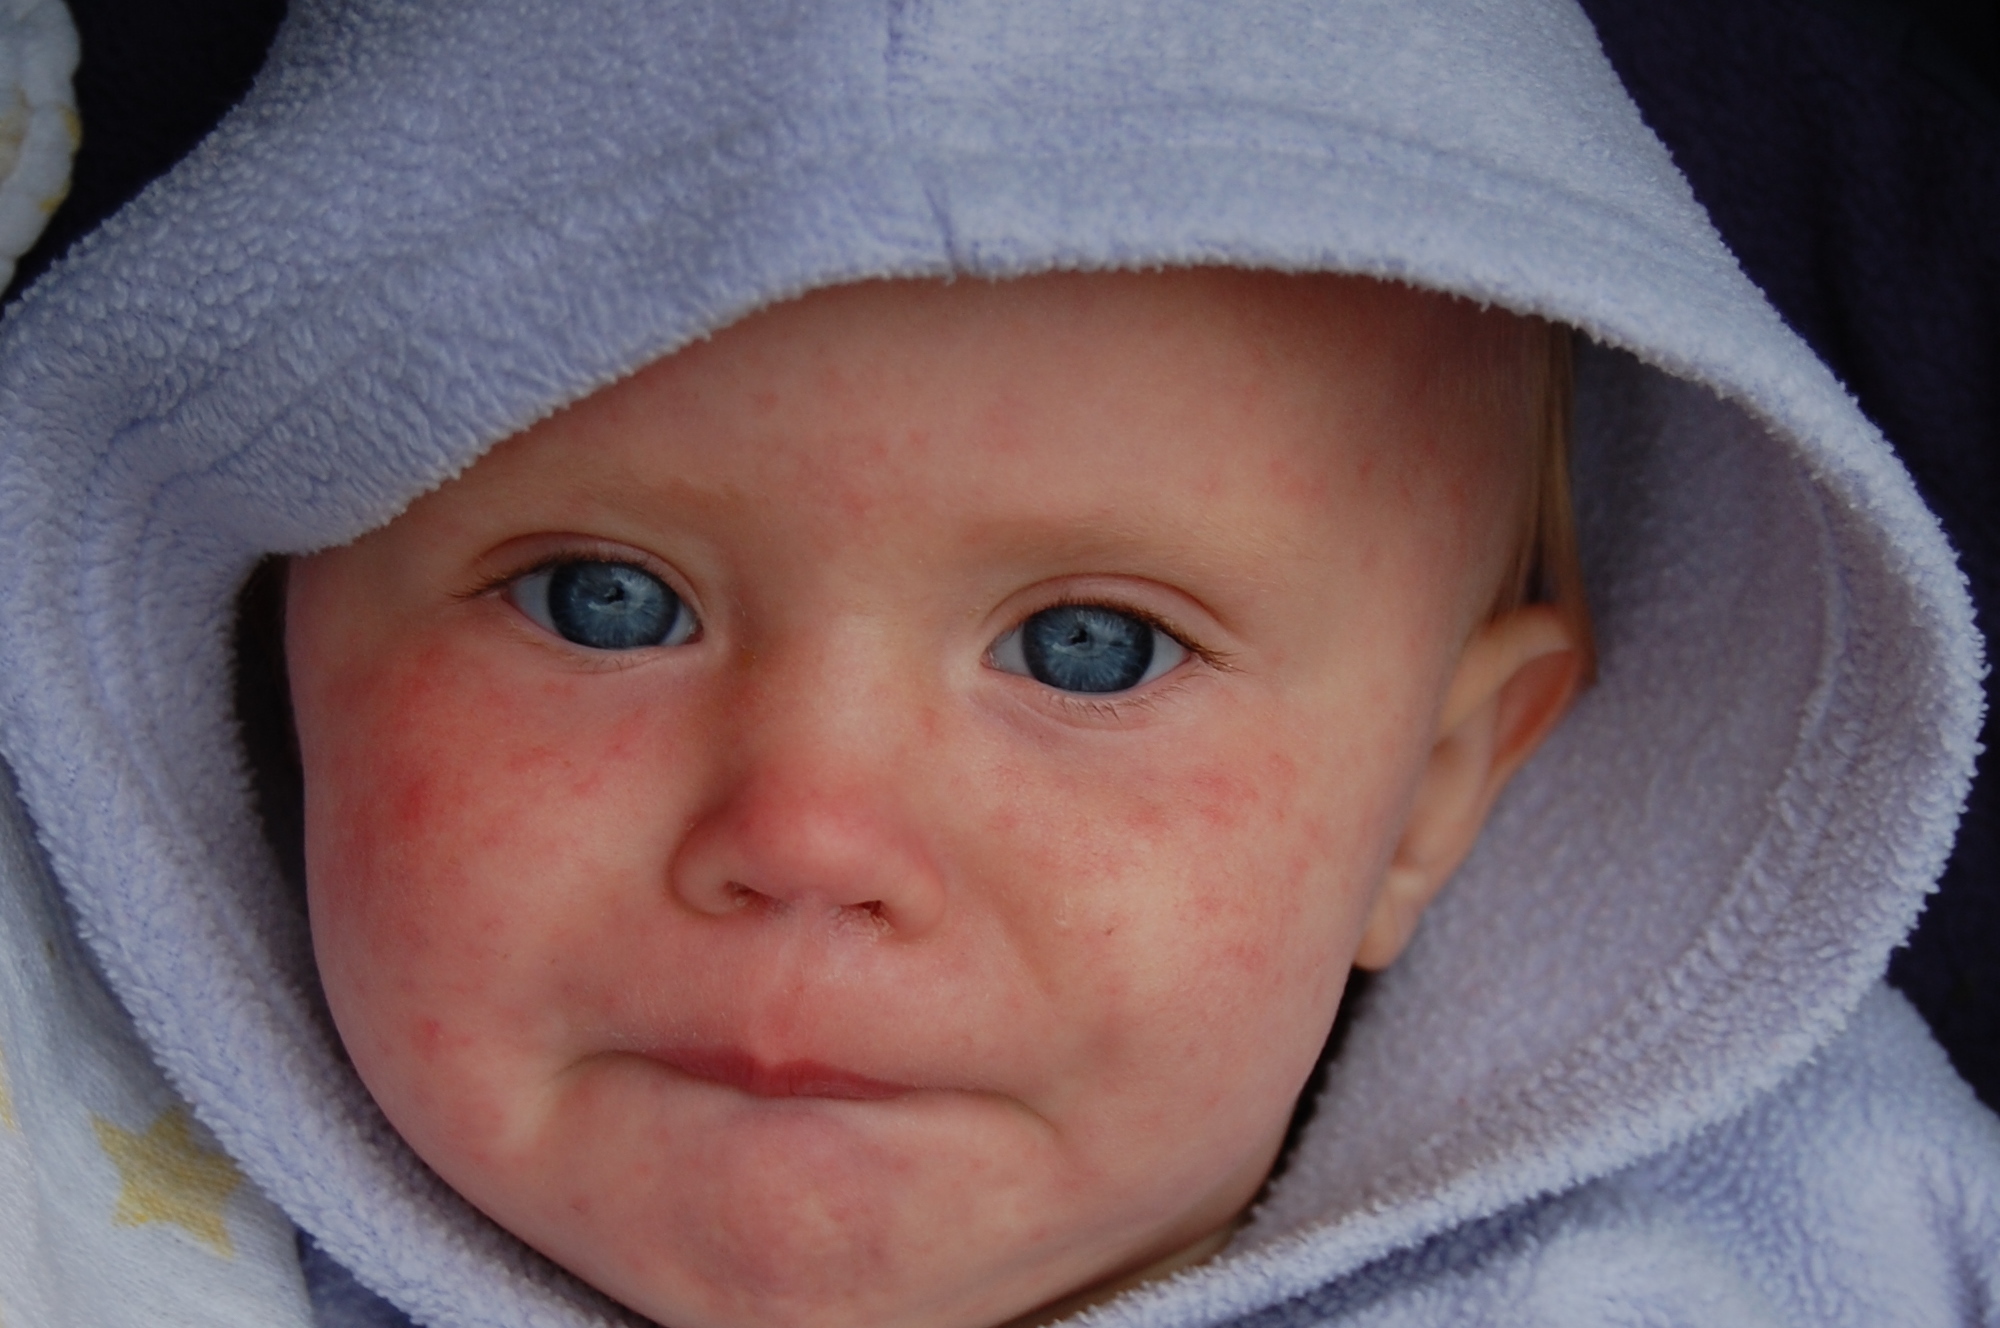 1 in 4 kindergartners aren’t fully vaccinated in county with measles outbreak